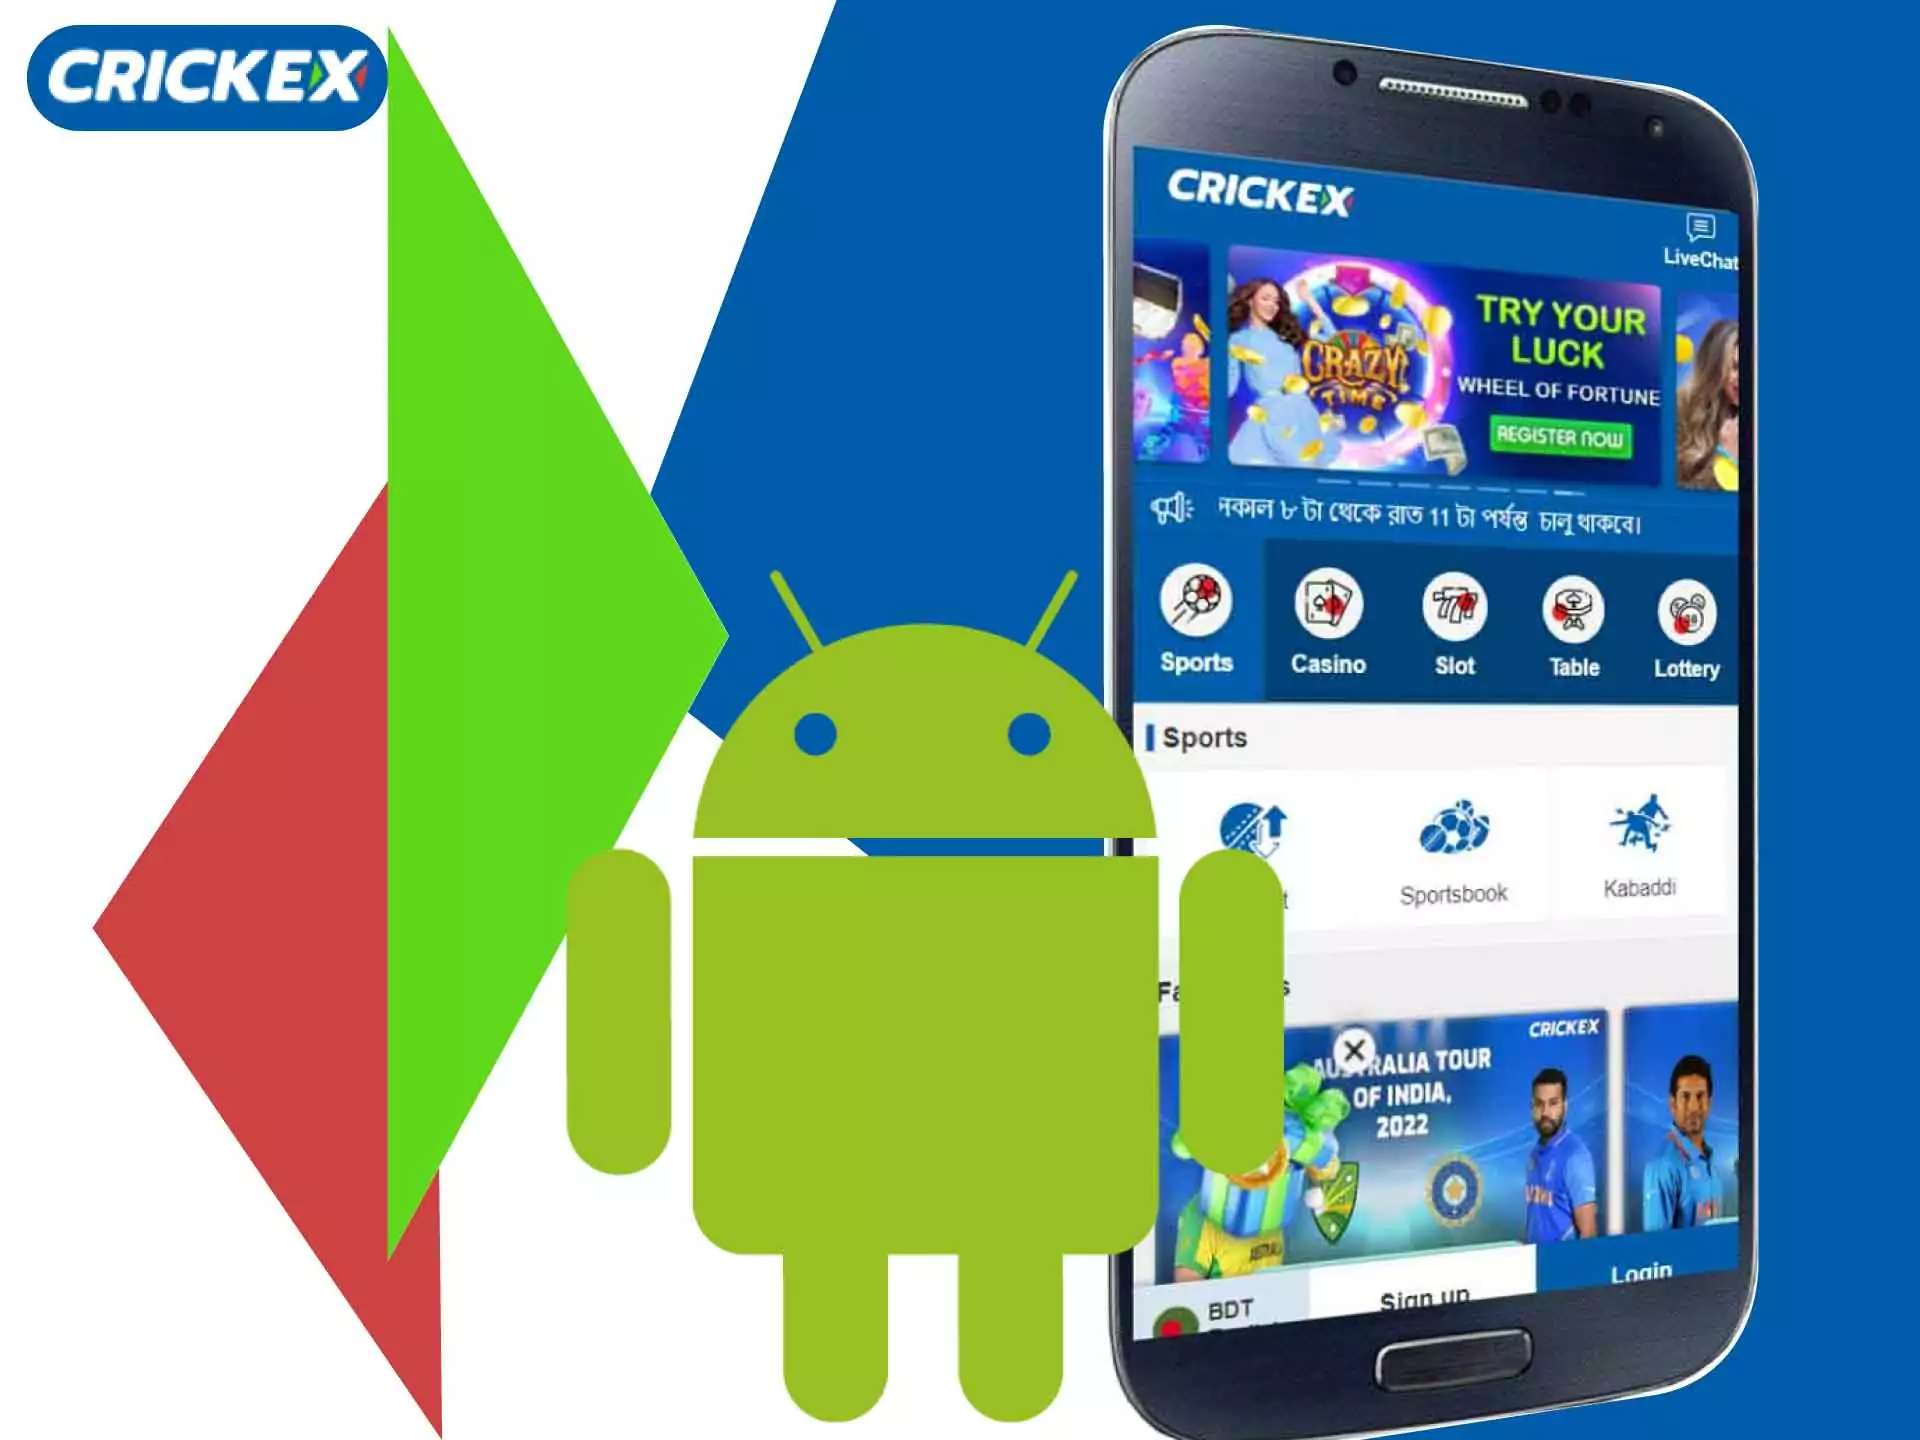 Crickex app runs on the most modern Android devices.